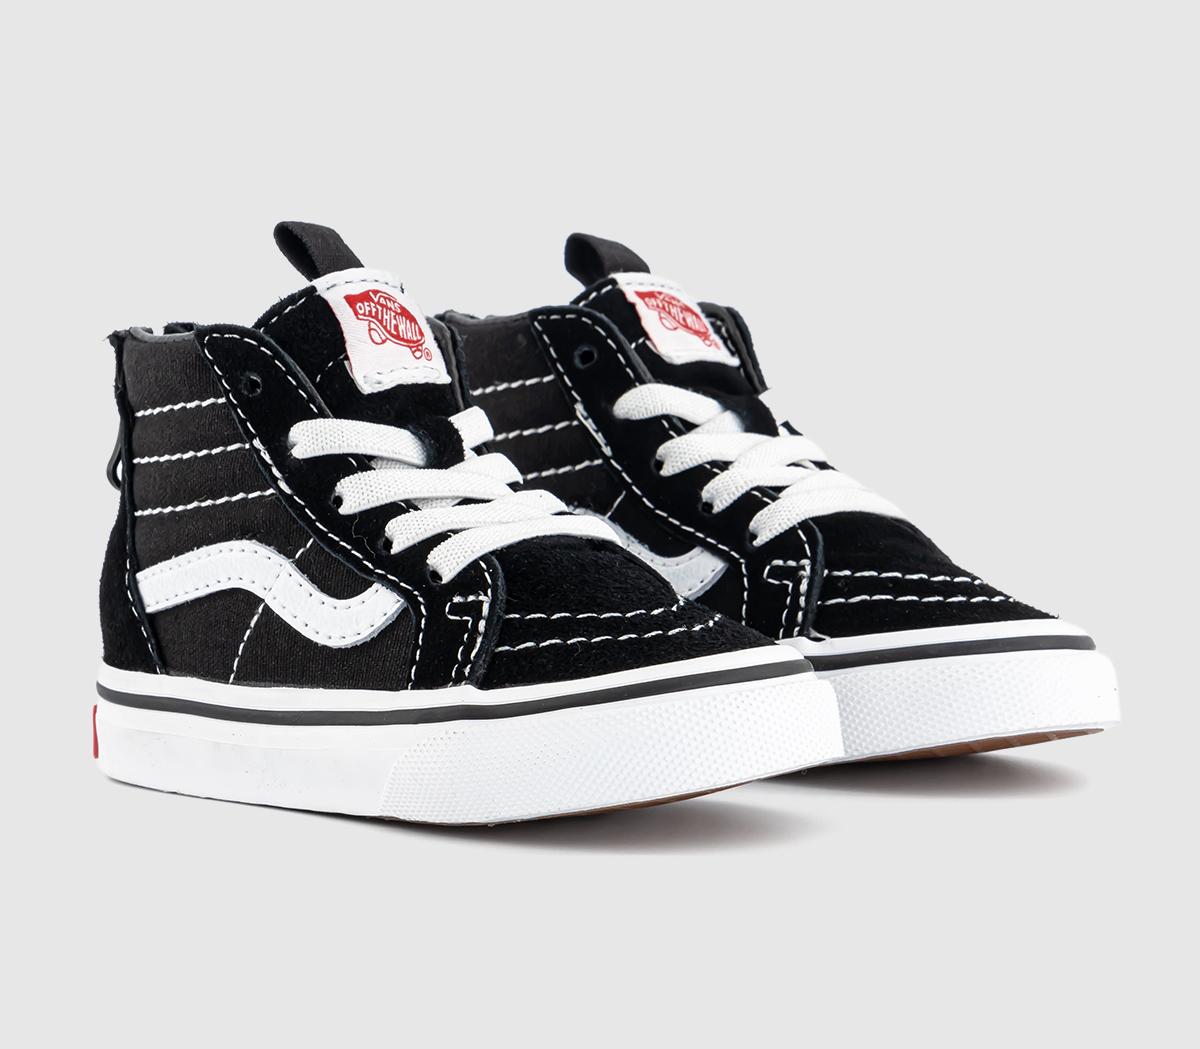 Vans Kids Sk8 Toddlers Black And White Canvas Hi Zip Trainers, Size: 7, 7 Infant